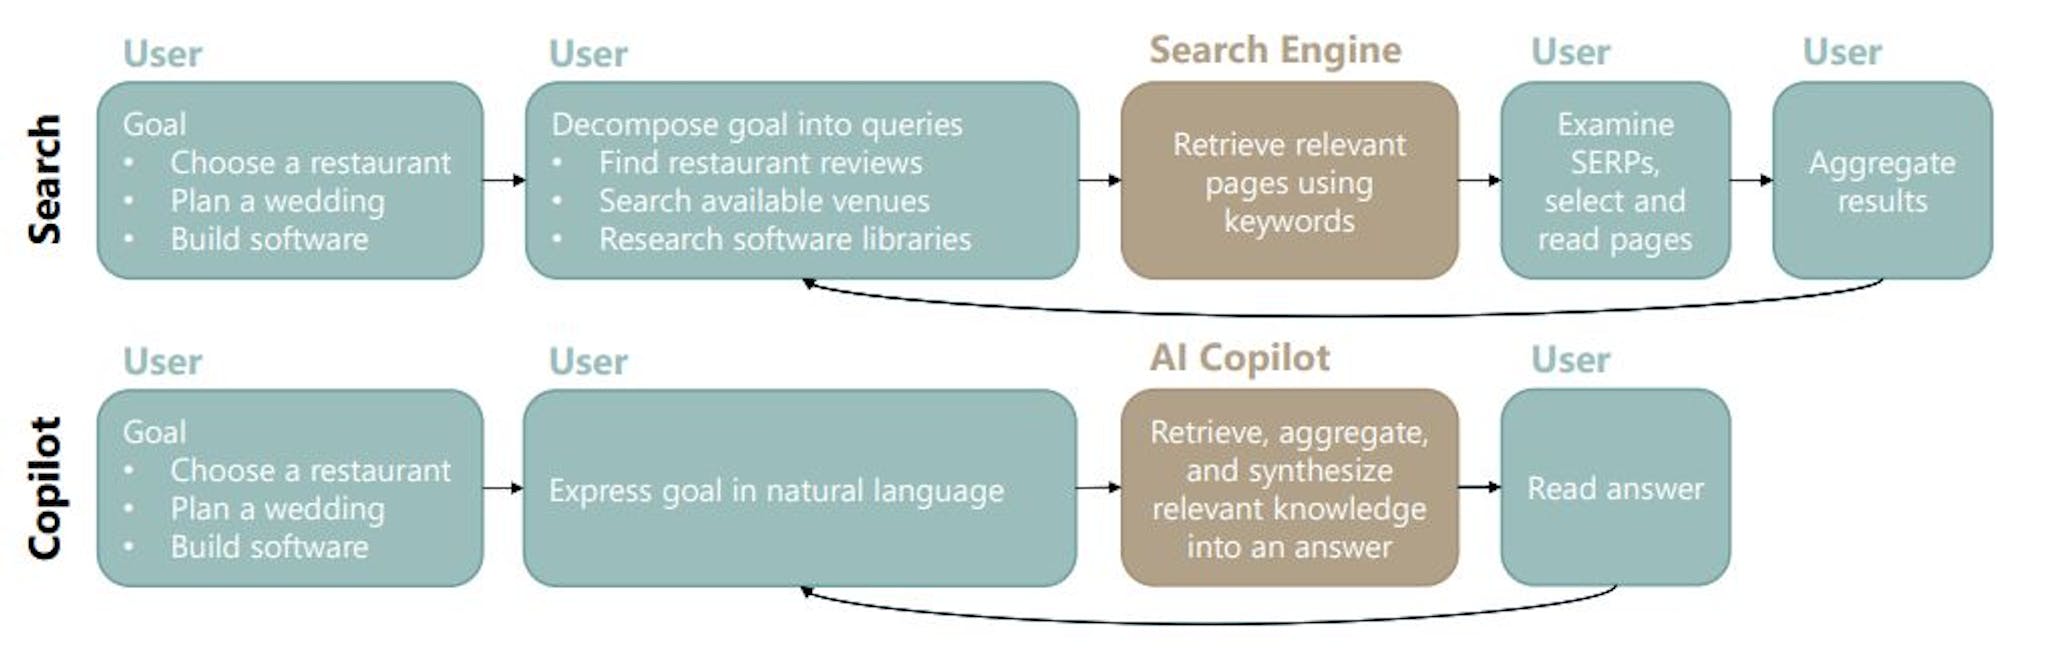 Figure 4: Information seeking processes in a traditional search engine versus an AI copilot (in this case Bing Chat).